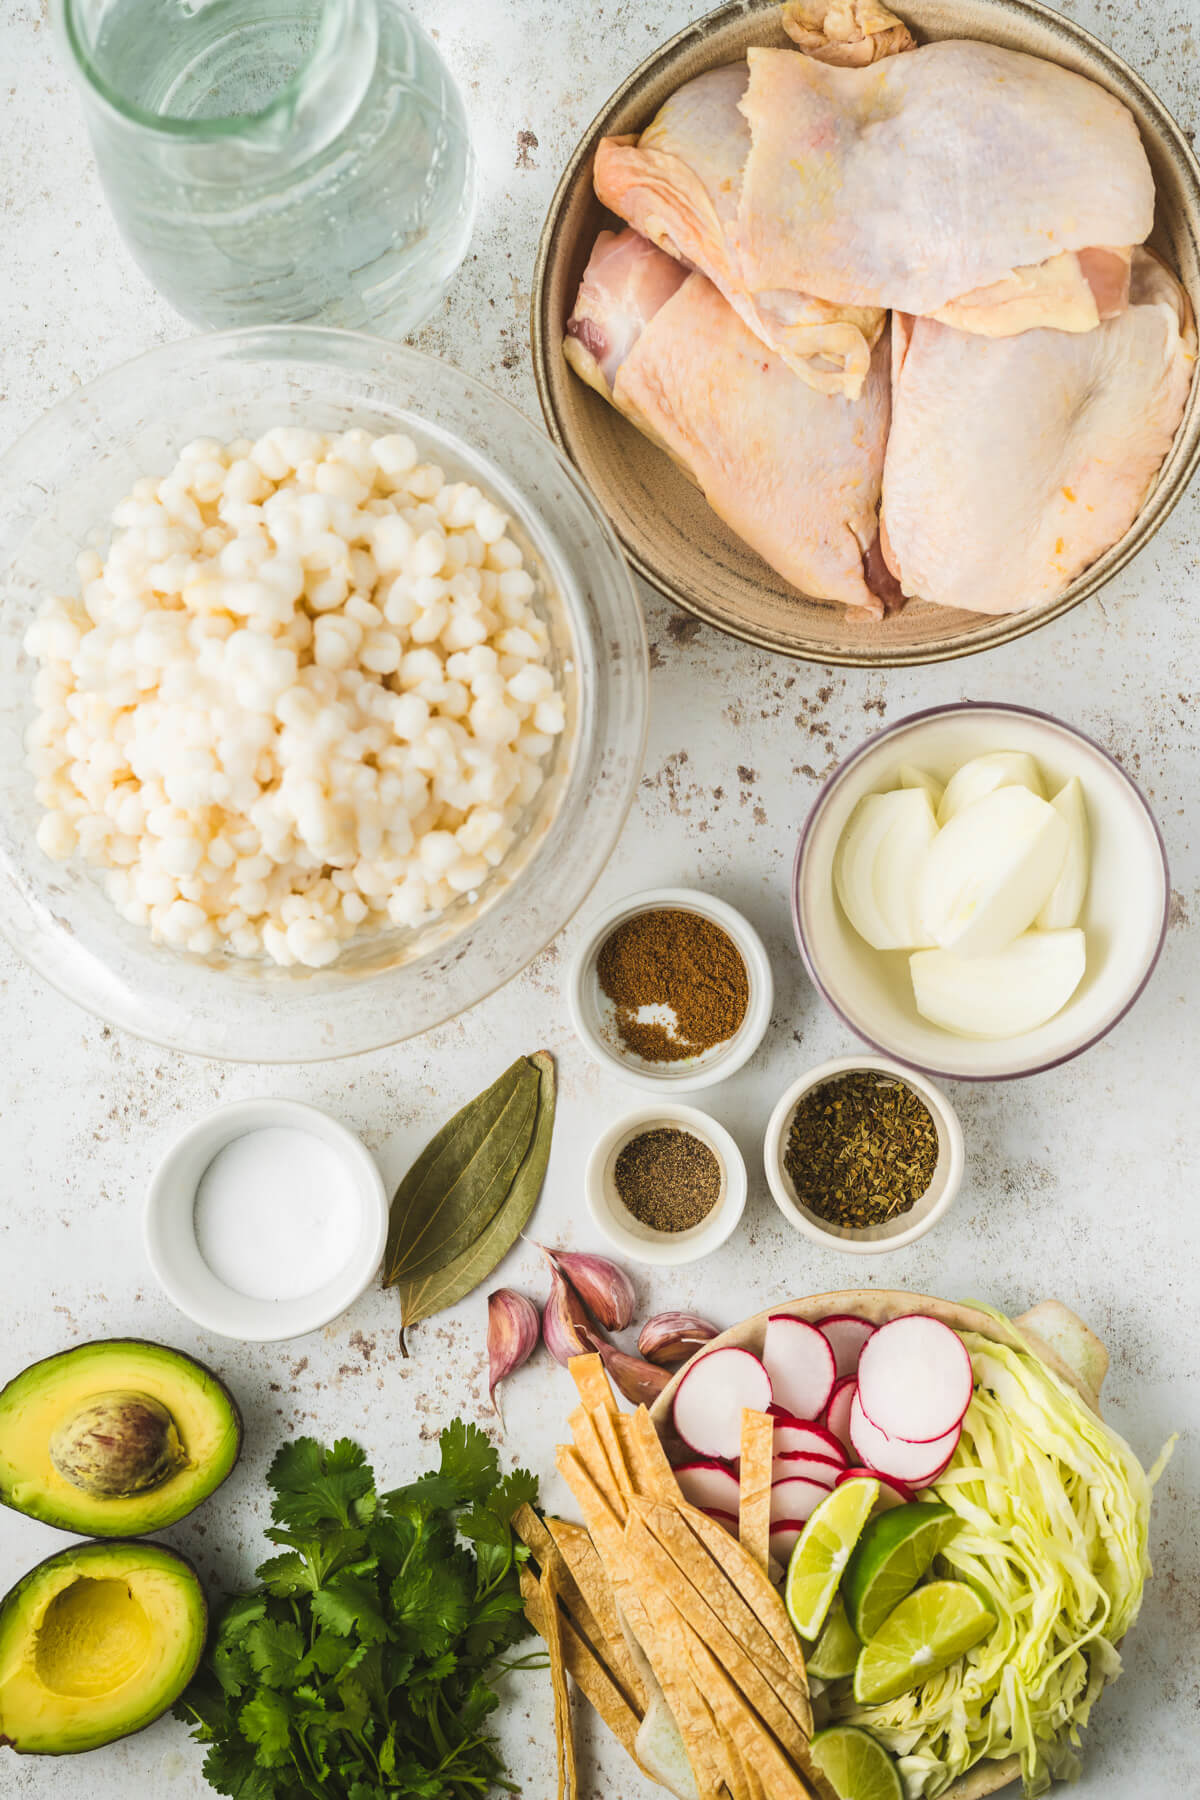 Ingredients required to make and garnish Pozole Blanco.